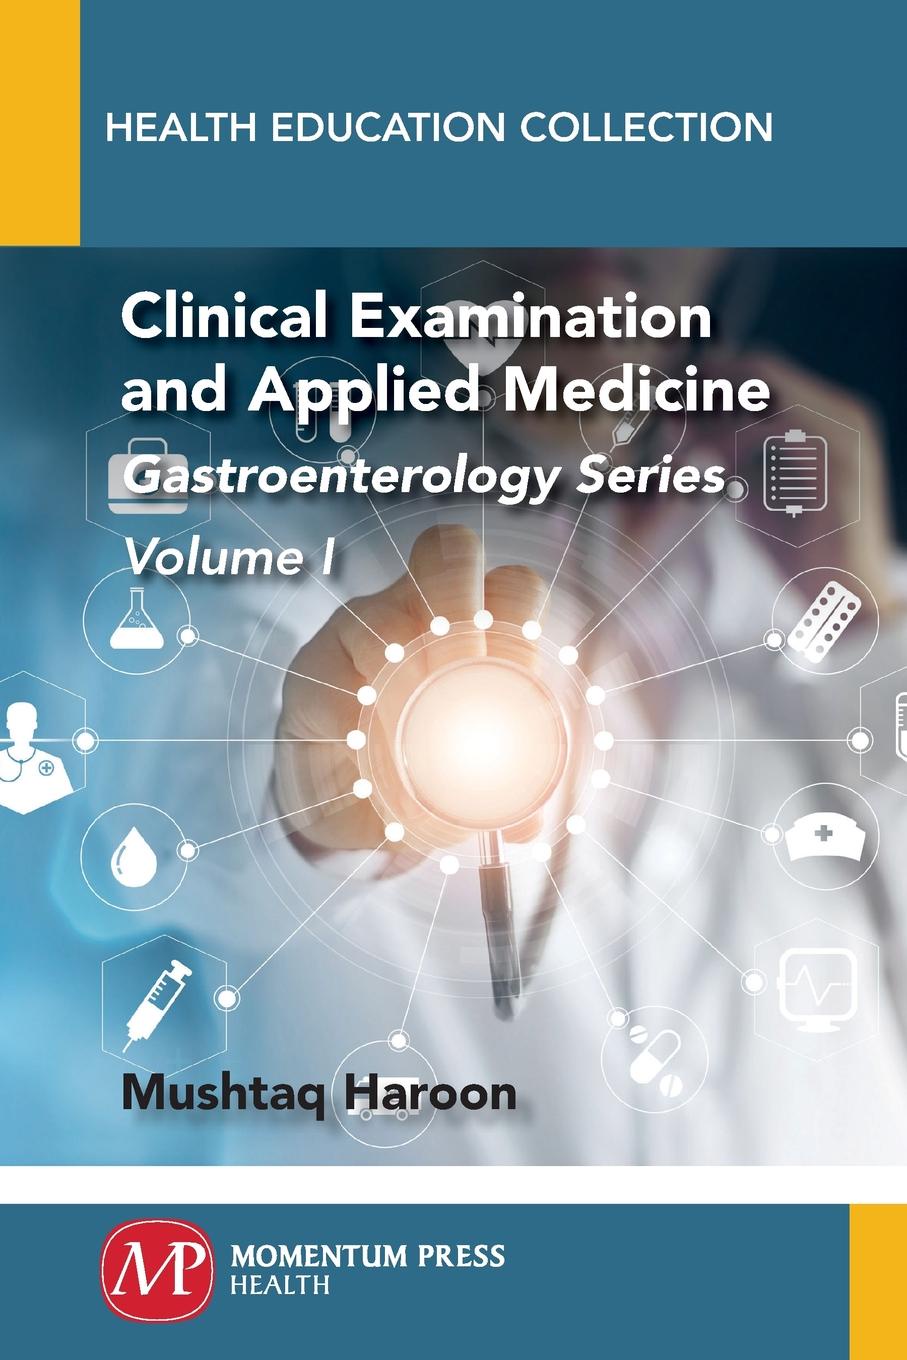 Clinical Examination and Applied Medicine, Volume I. Gastroenterology Series